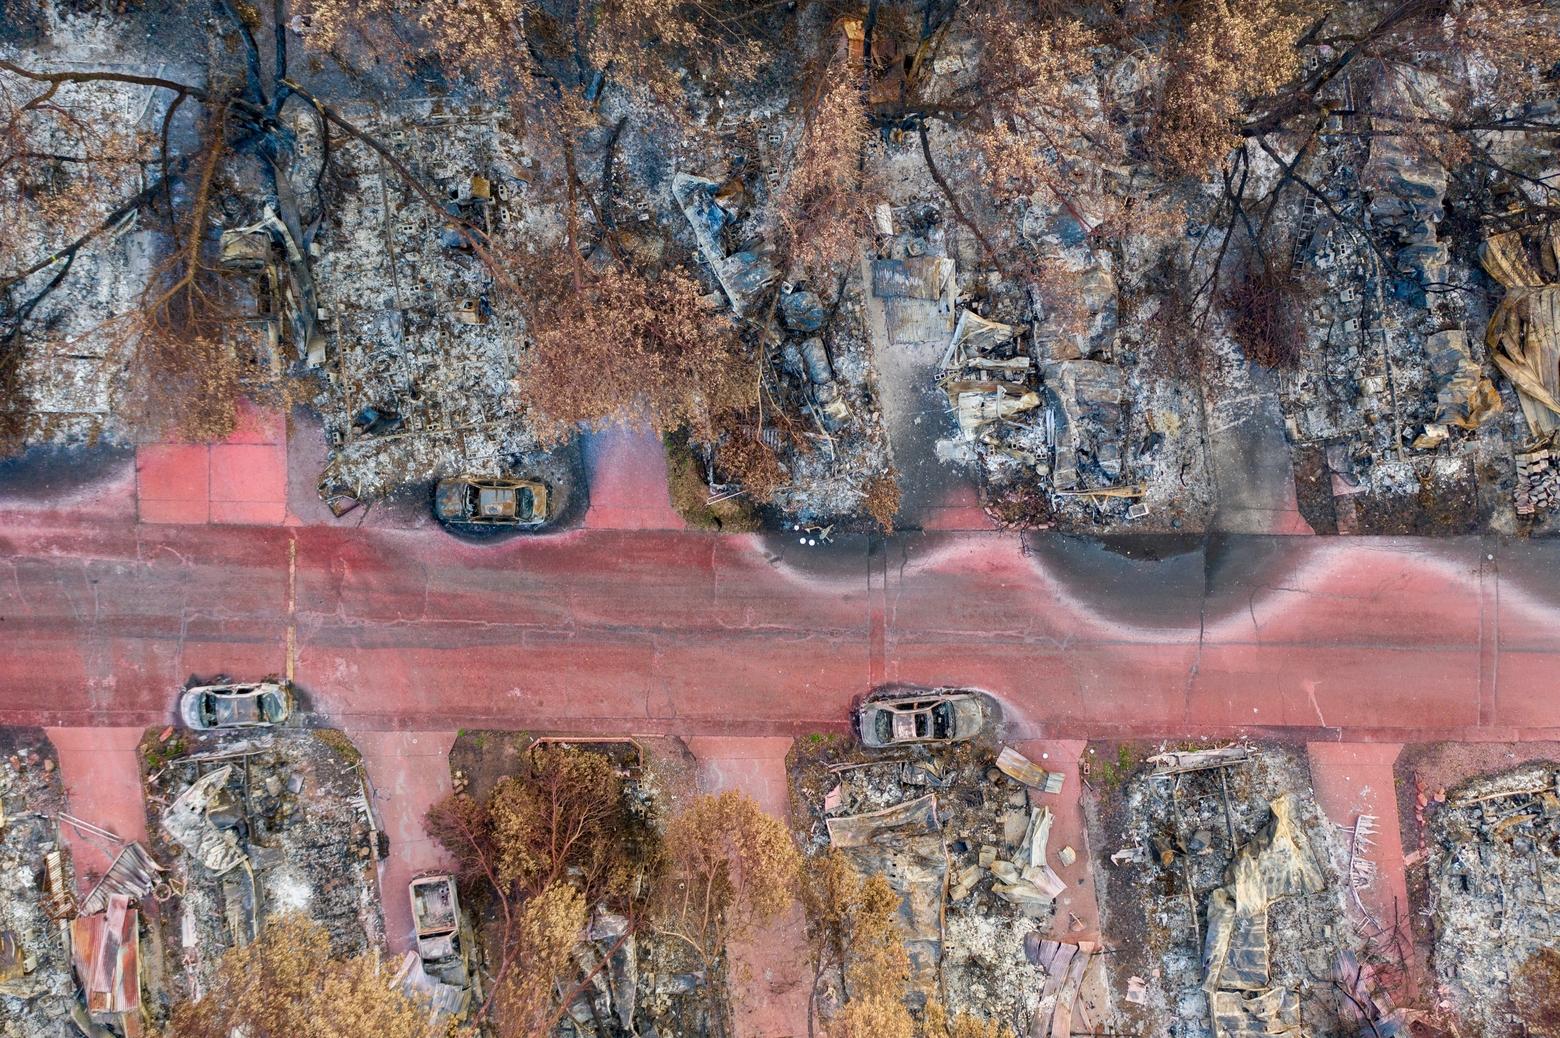 Aerial view of a burned down community and vehicles in southern Oregon where the 2020 Almeda Fire reached a WUI subdivision few thought would ever be destroyed by wildfire.  Photo courtesy Shutterstock ID 1829602370